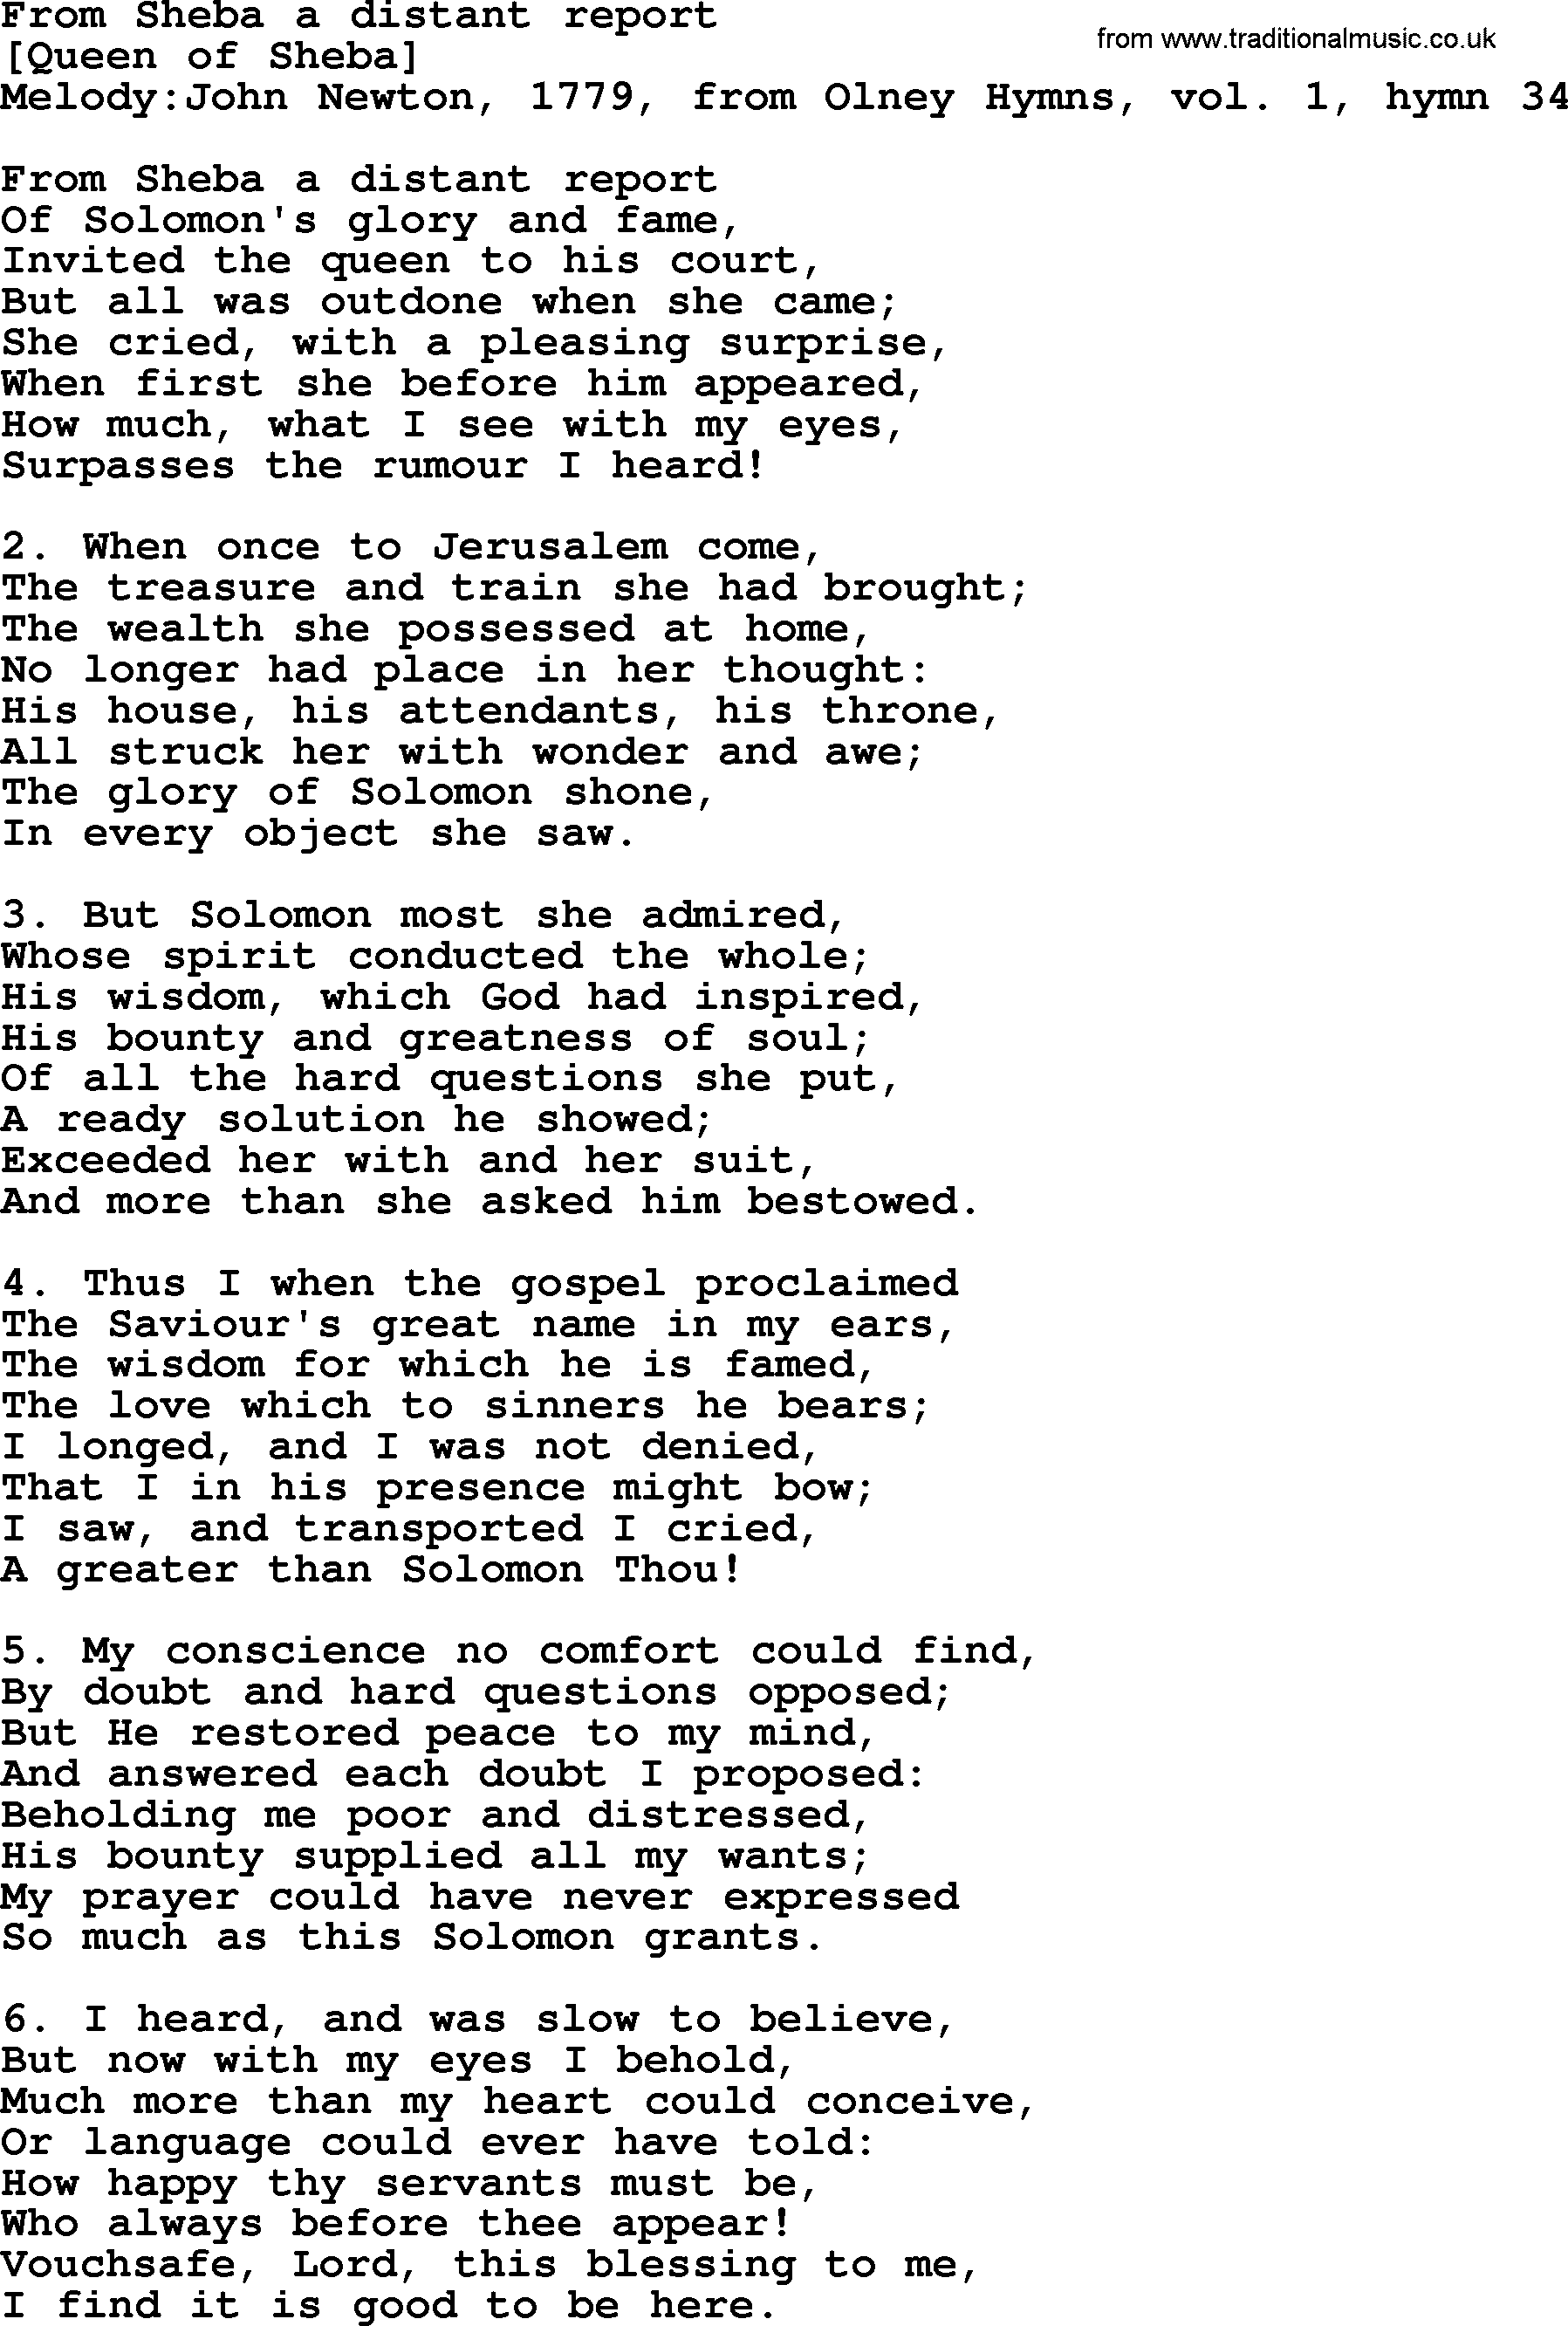 Old English Song: From Sheba A Distant Report lyrics